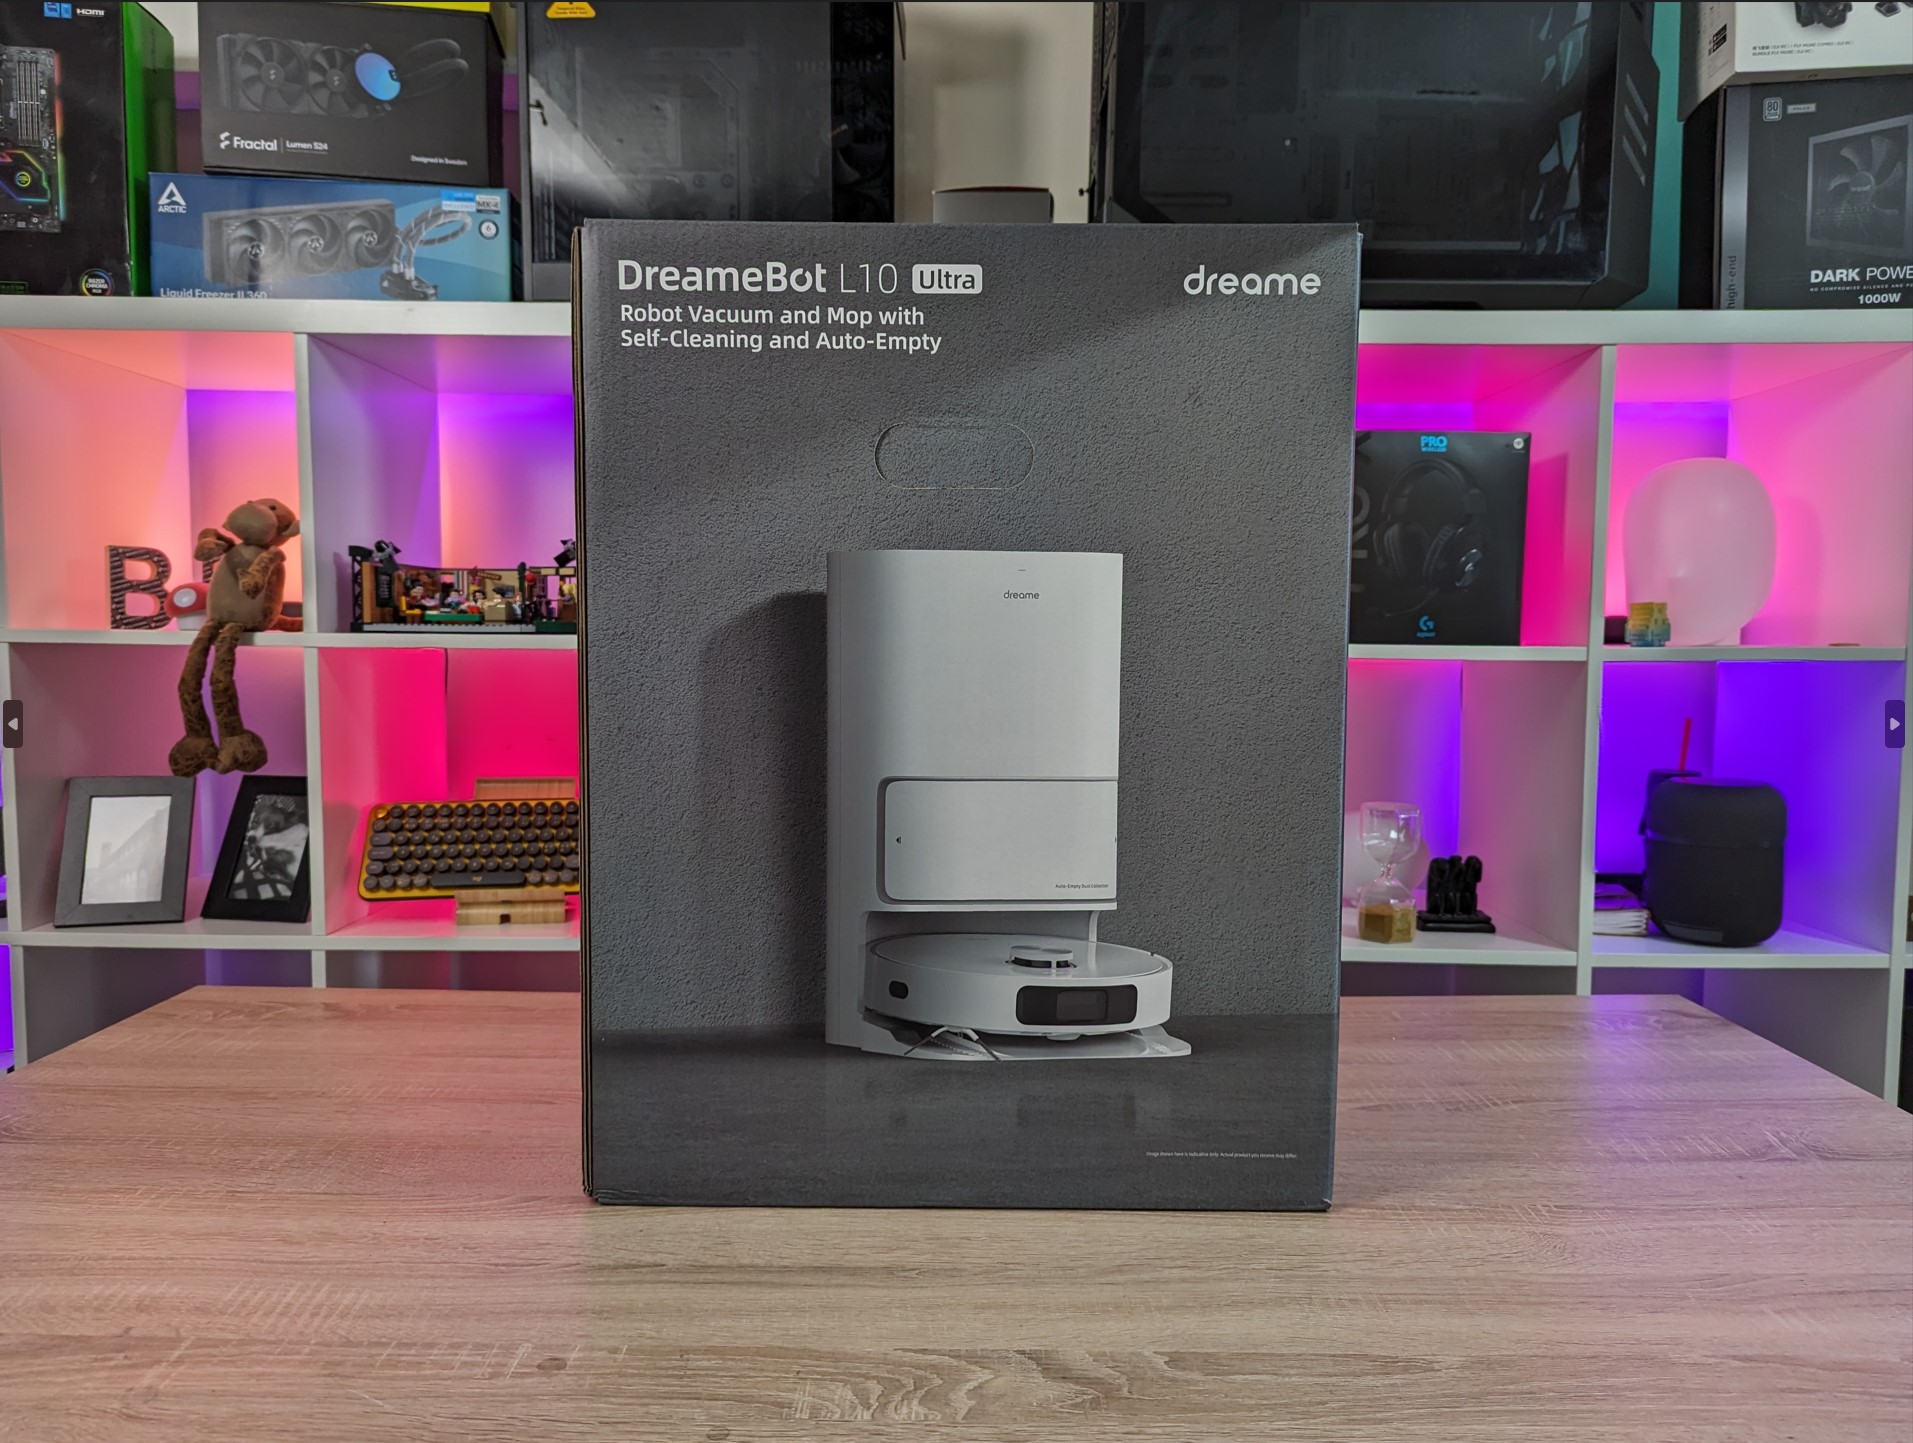 DreameBot L10s Ultra review: Too-noisy automated cleaning